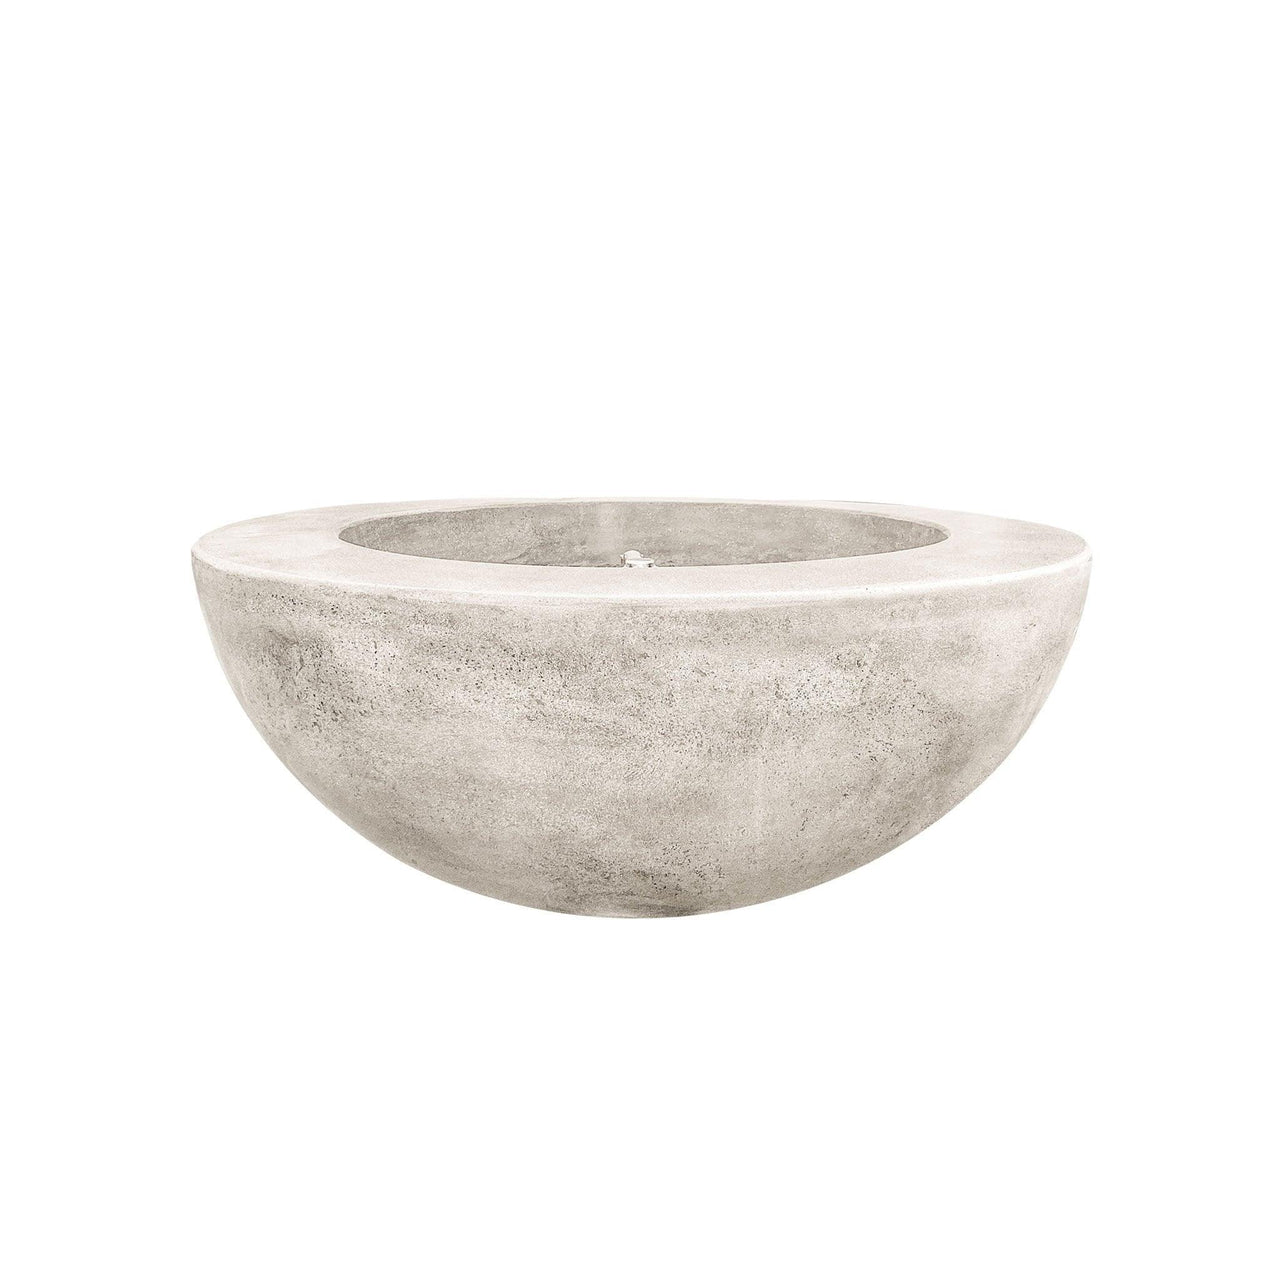 Prism Hardscapes - Moderno Series 5 Round Concrete Fire Bowl - Fire Pit Stock